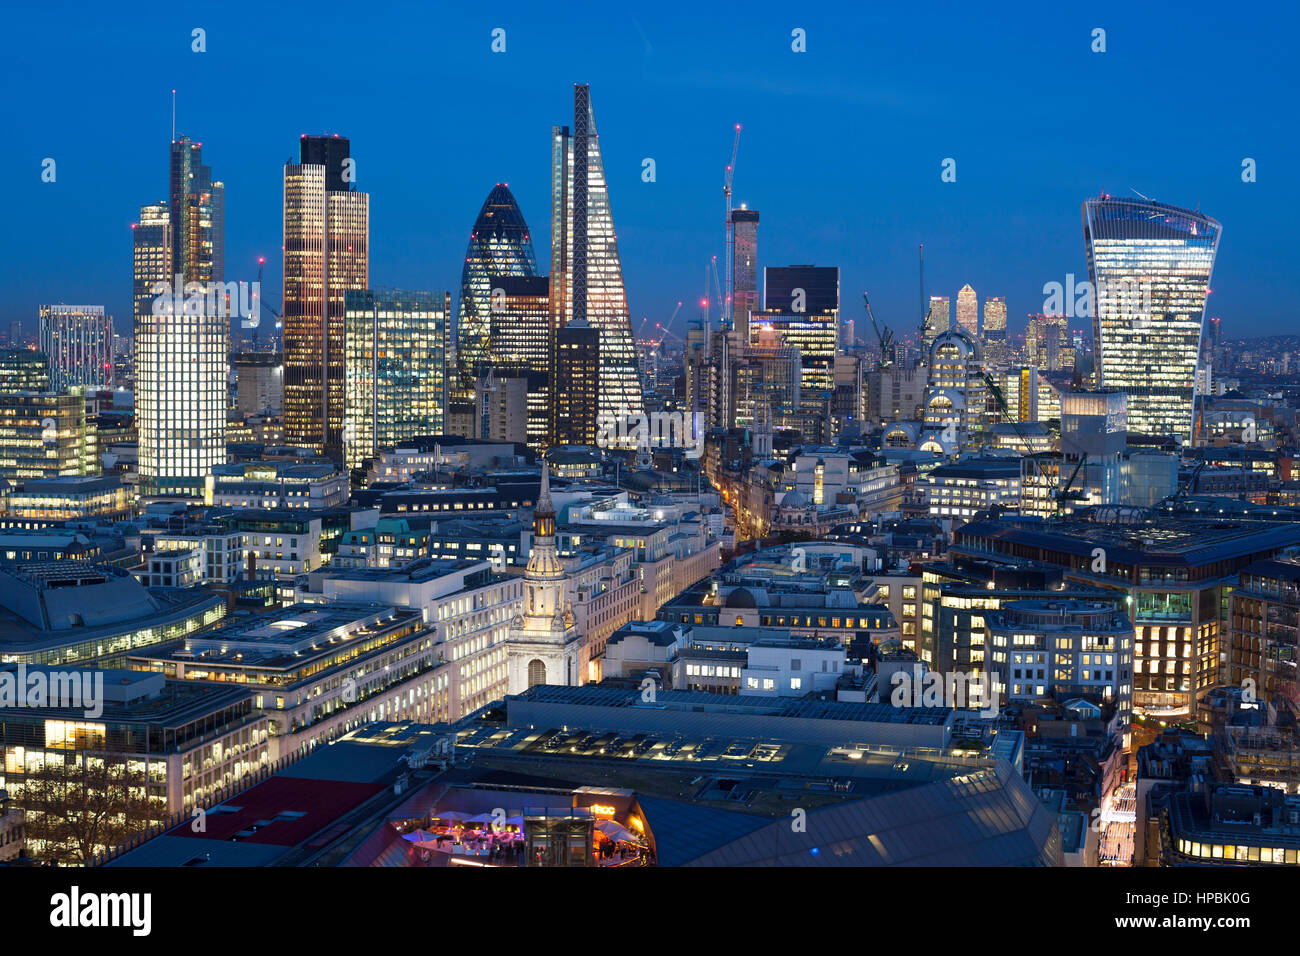 Elevated view of the financial district of London, England. Stock Photo